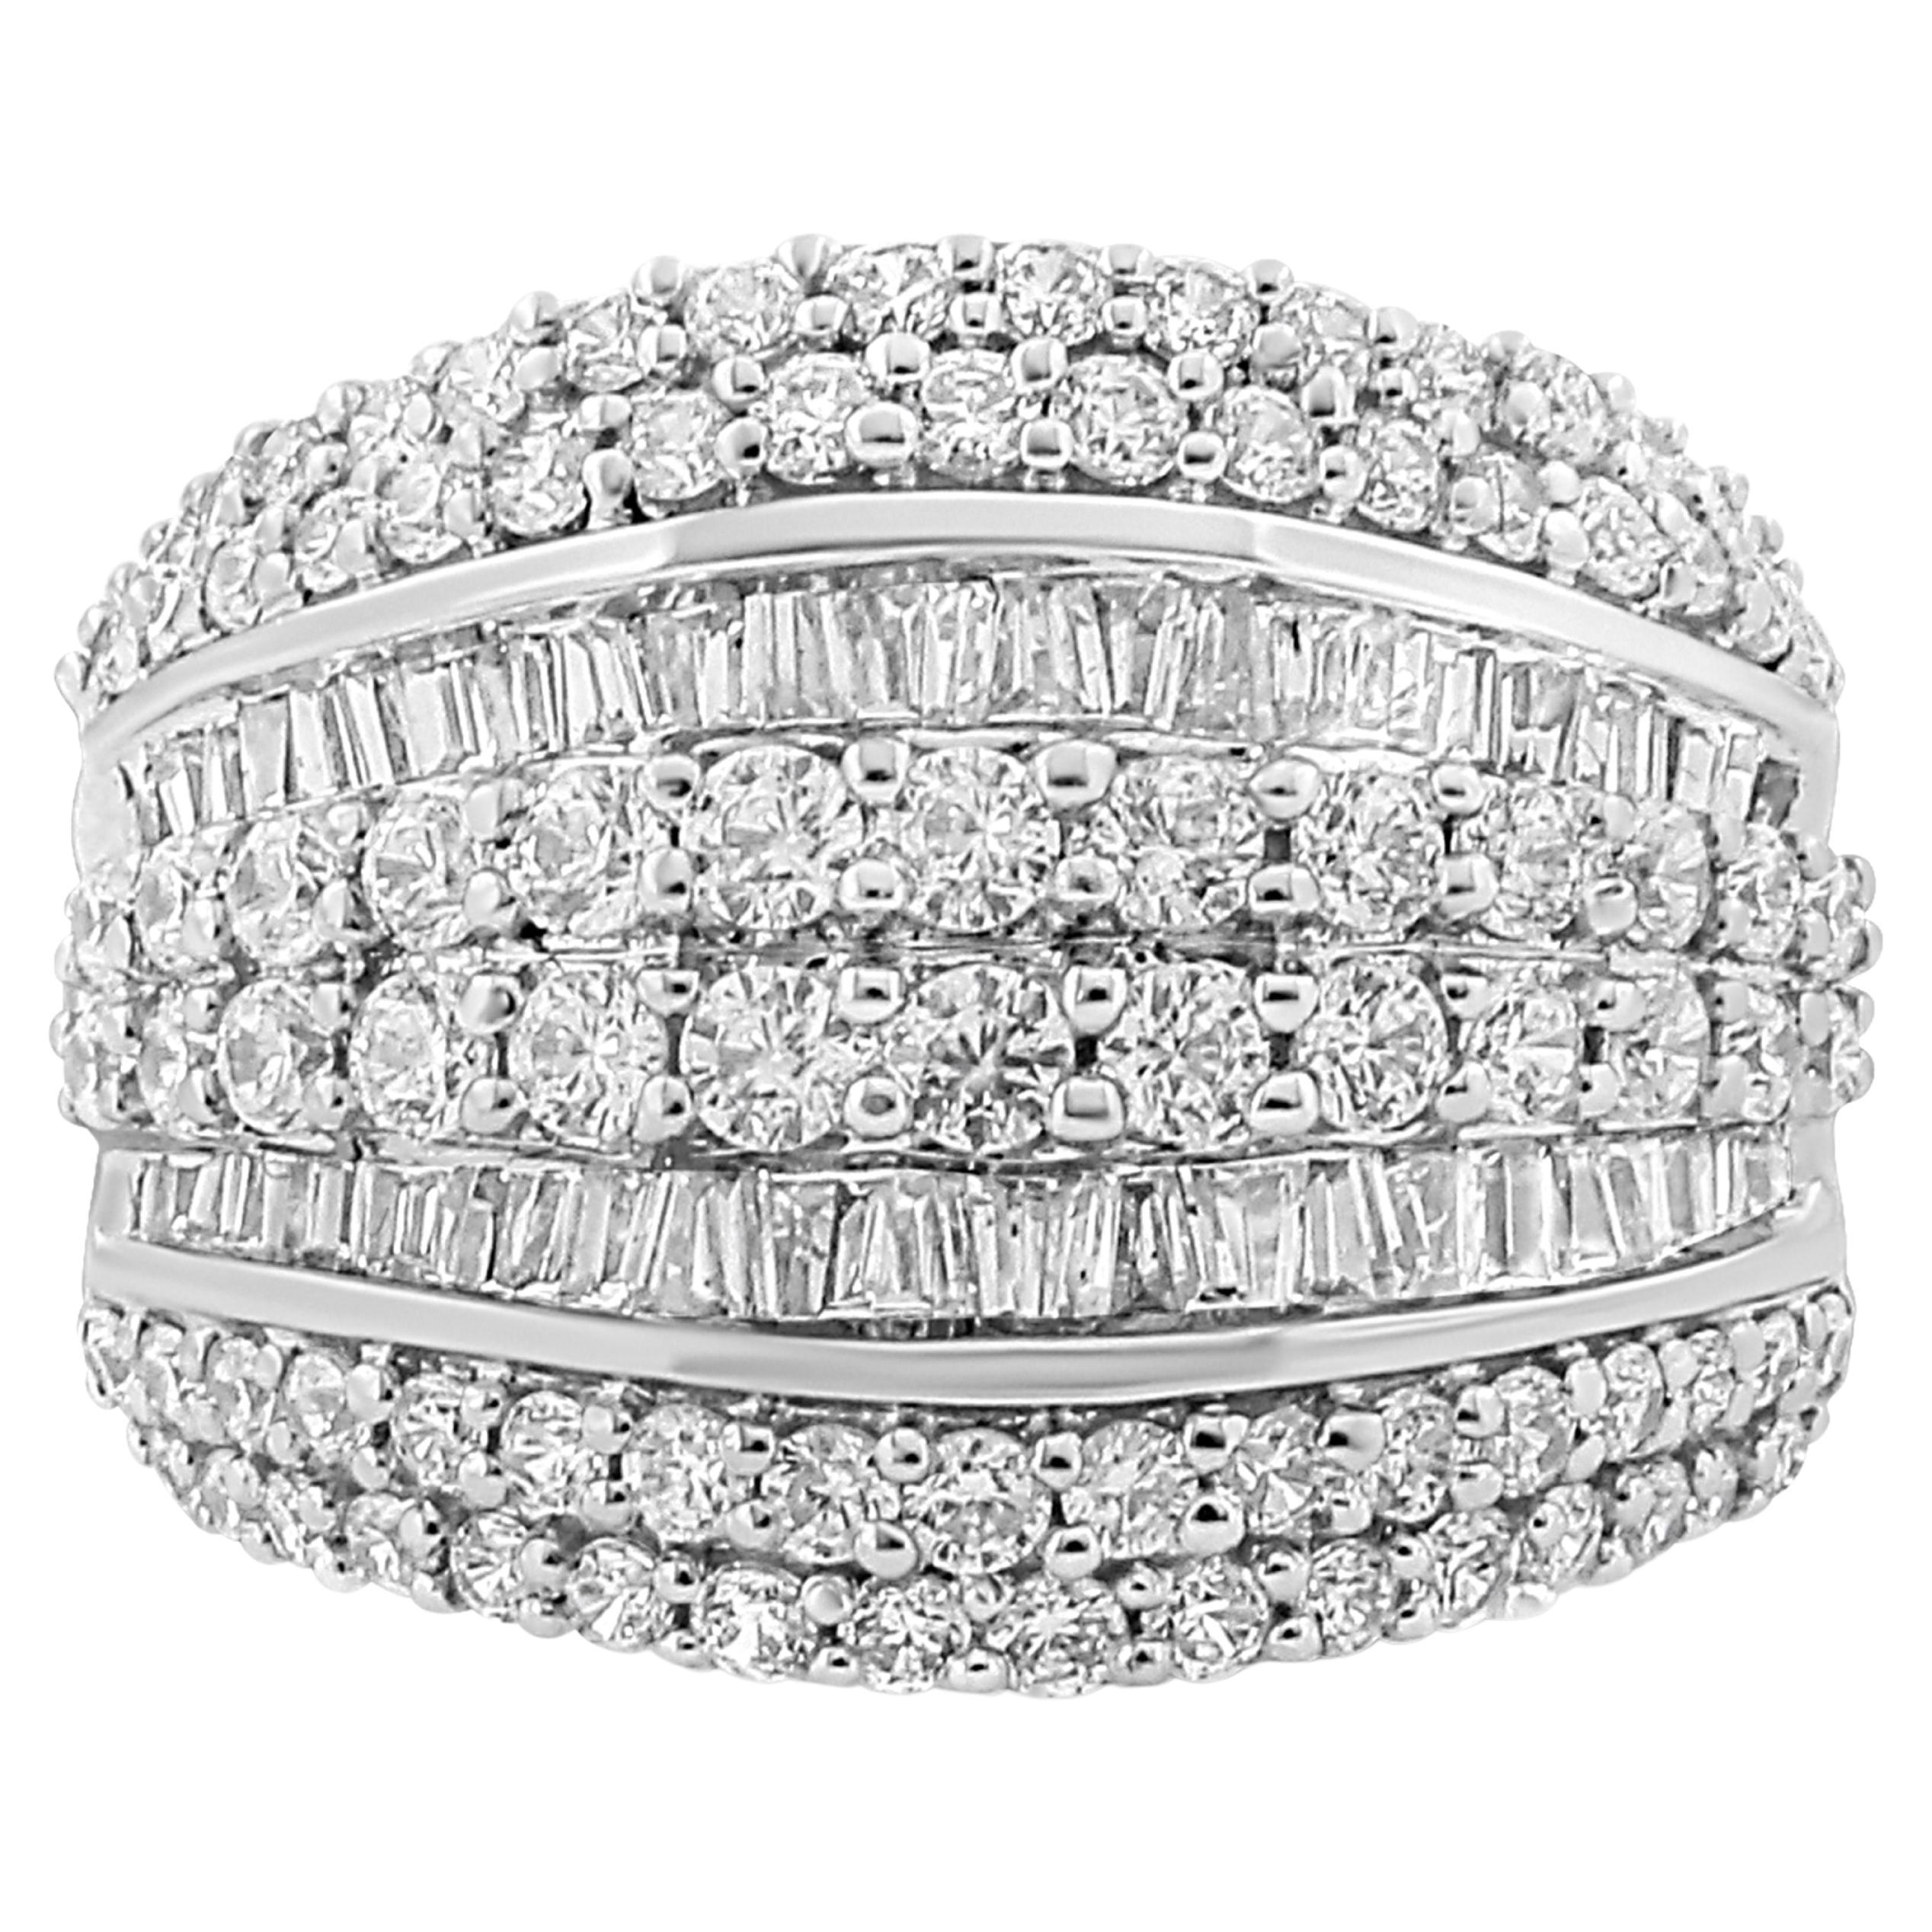 For Sale:  .925 Sterling Silver 2.0 Carat Round and Baguette-Cut Diamond Cluster Ring